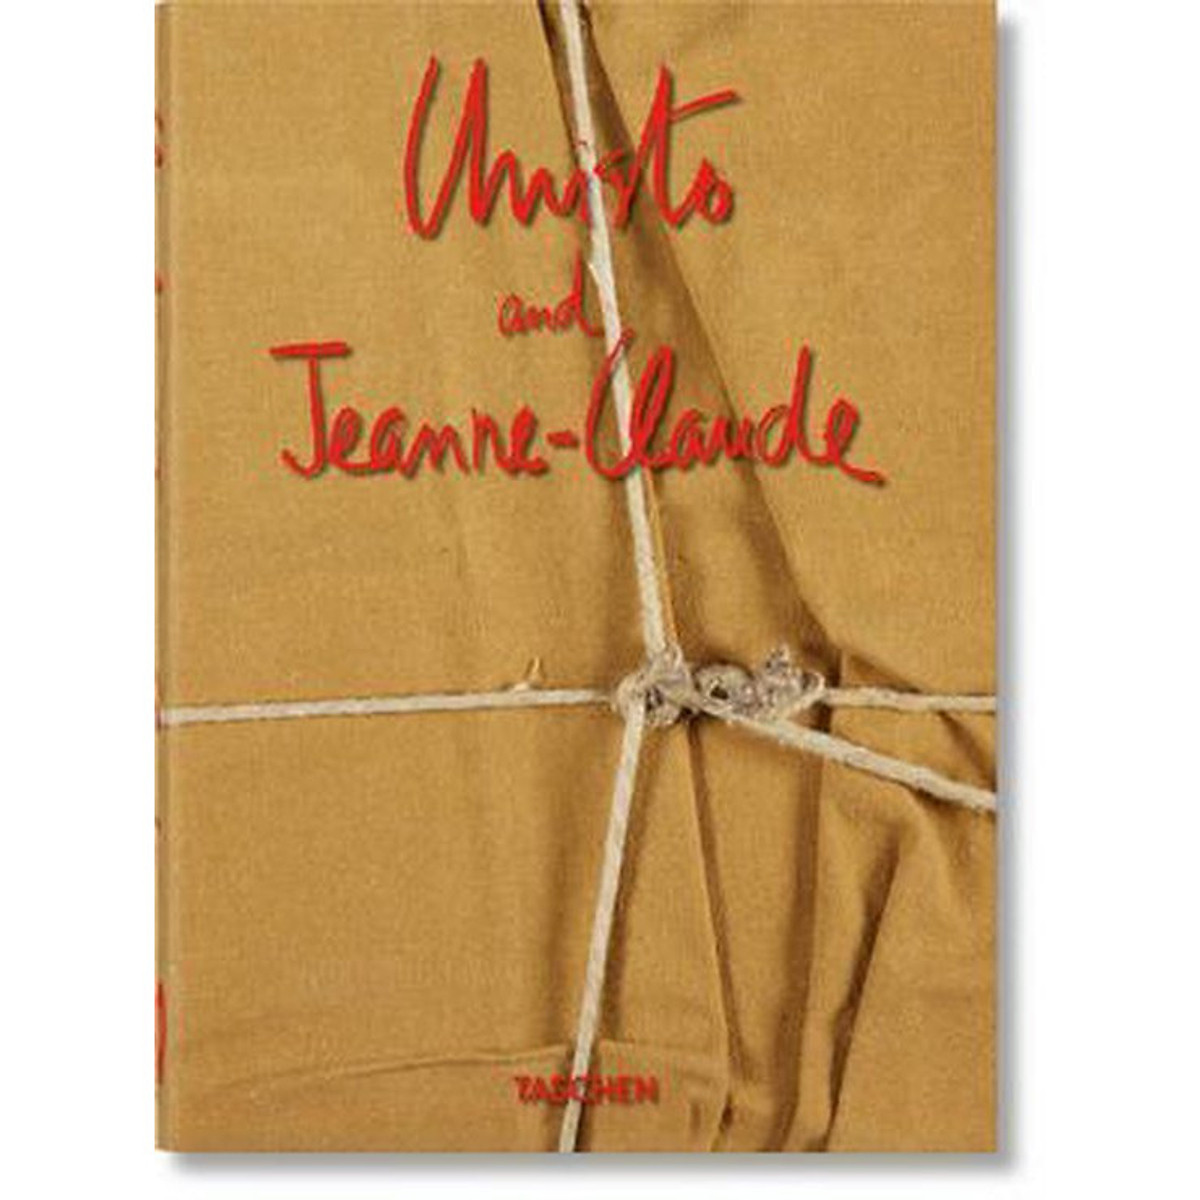 Christo And Jeanne-Claude. 40th Anniversary Edition